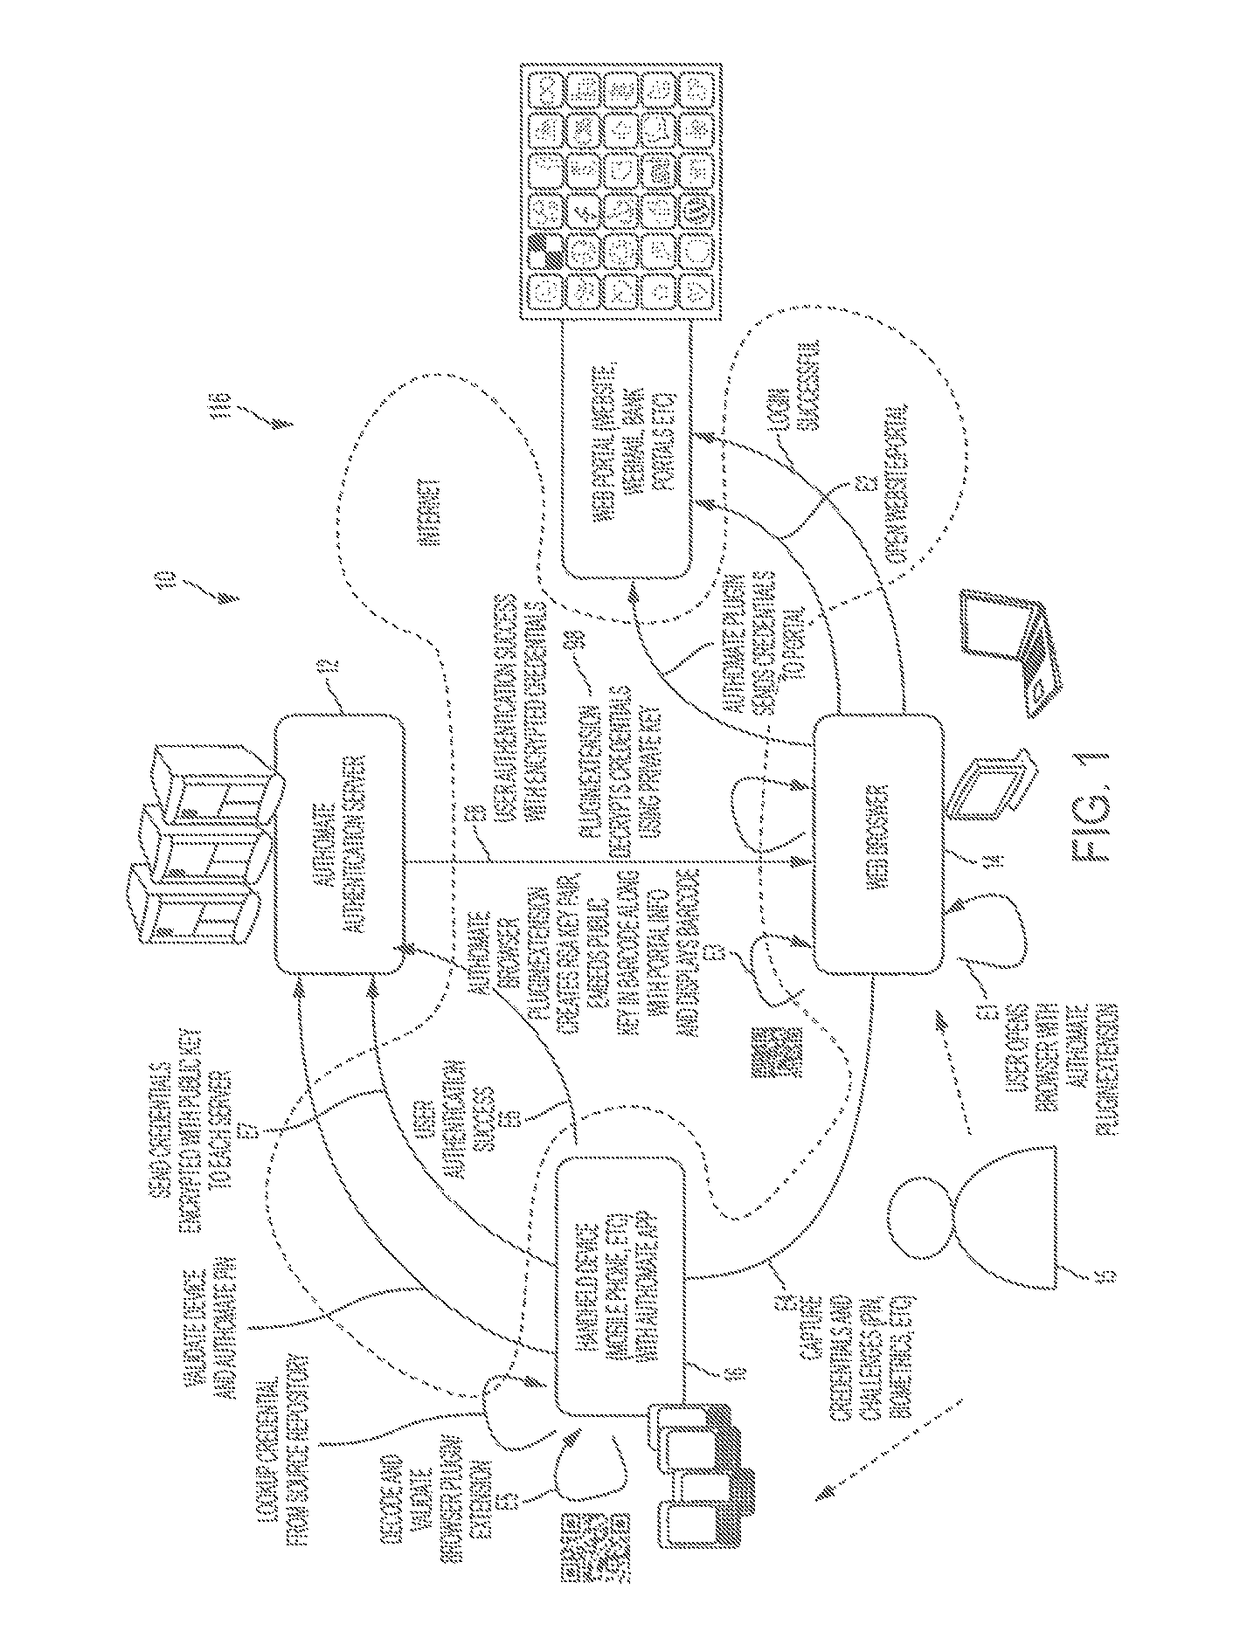 System, design and process for easy to use credentials management for accessing online portals using out-of-band authentication